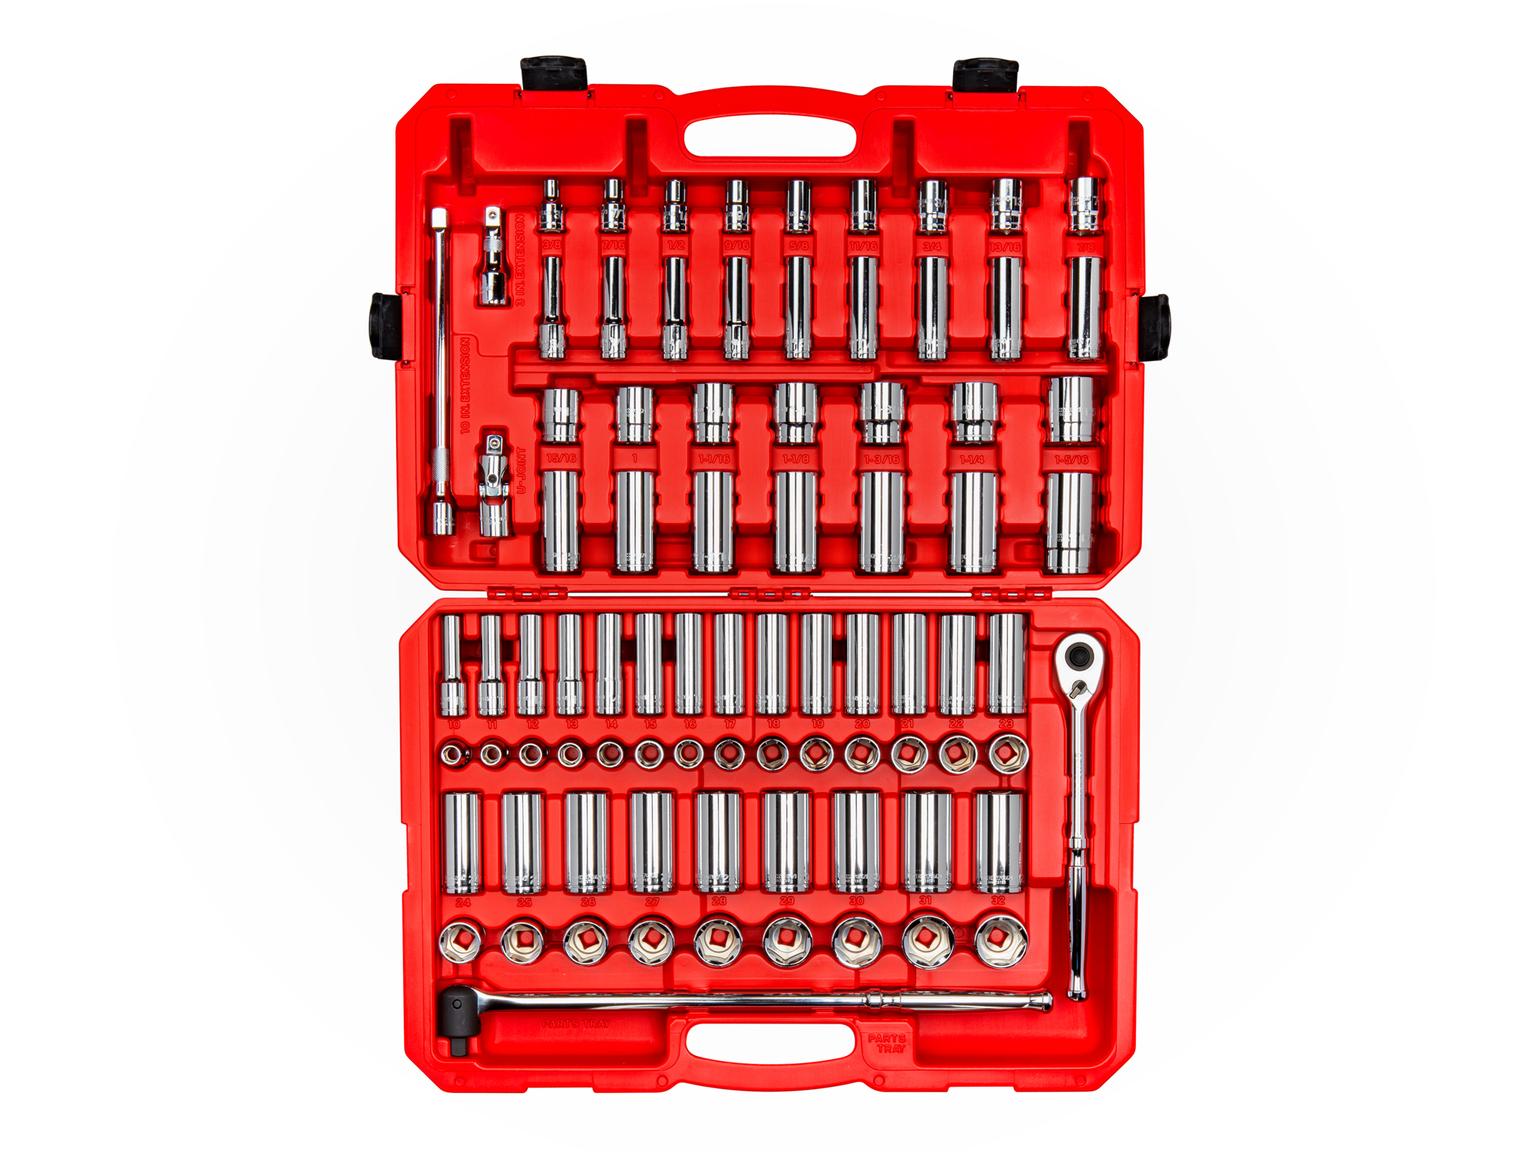 TEKTON SKT25302-D 1/2 Inch Drive 6-Point Socket and Ratchet Set, 83-Piece (3/8 - 1-5/16 in., 10-32 mm)